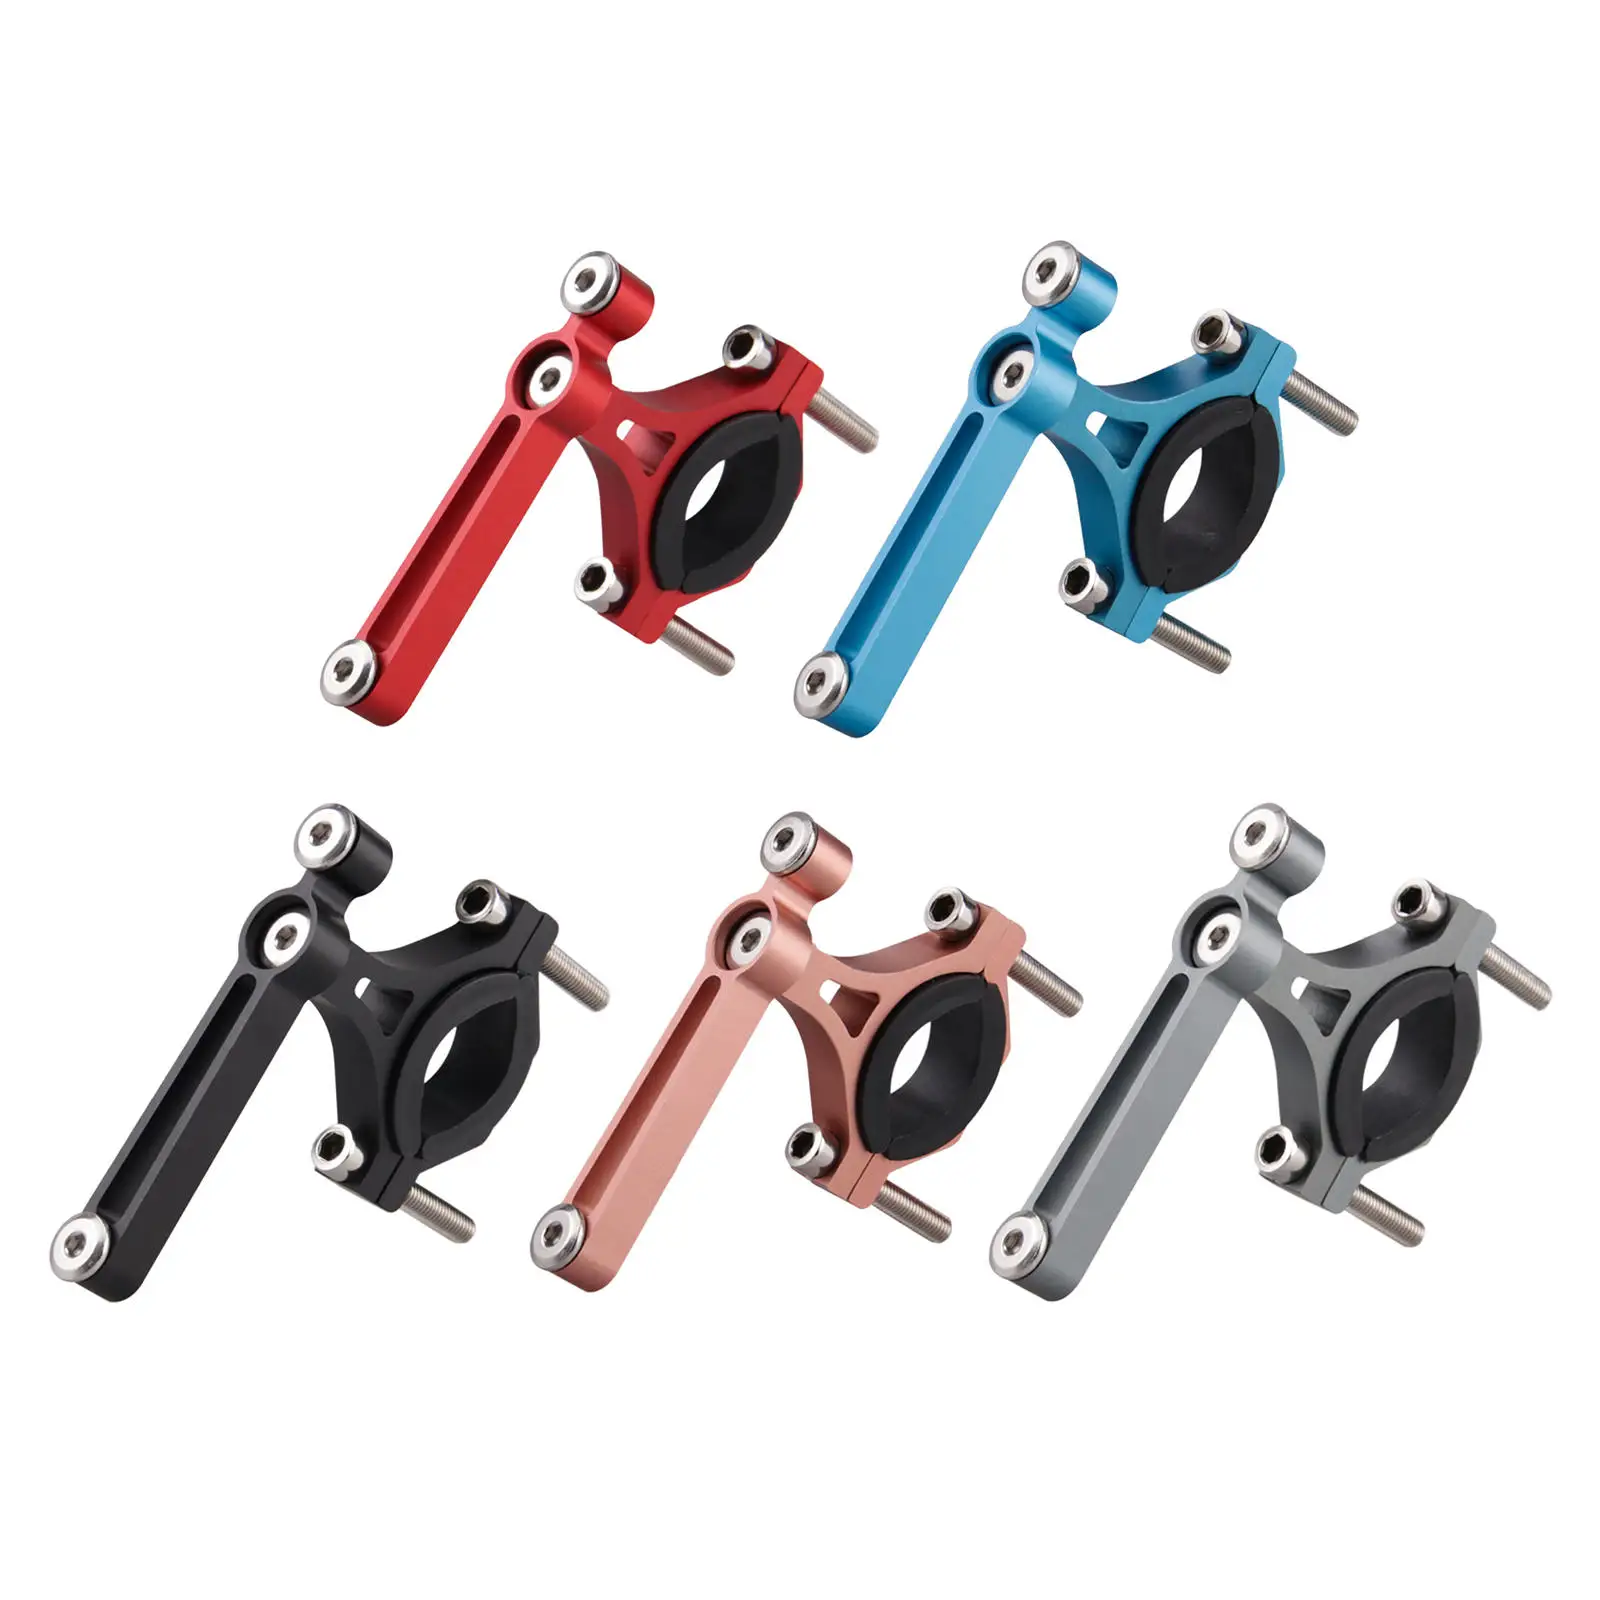 Bike Water Bottle Holder Clamp Clip Cage Mount Adapter for Bicycle Motorcycle